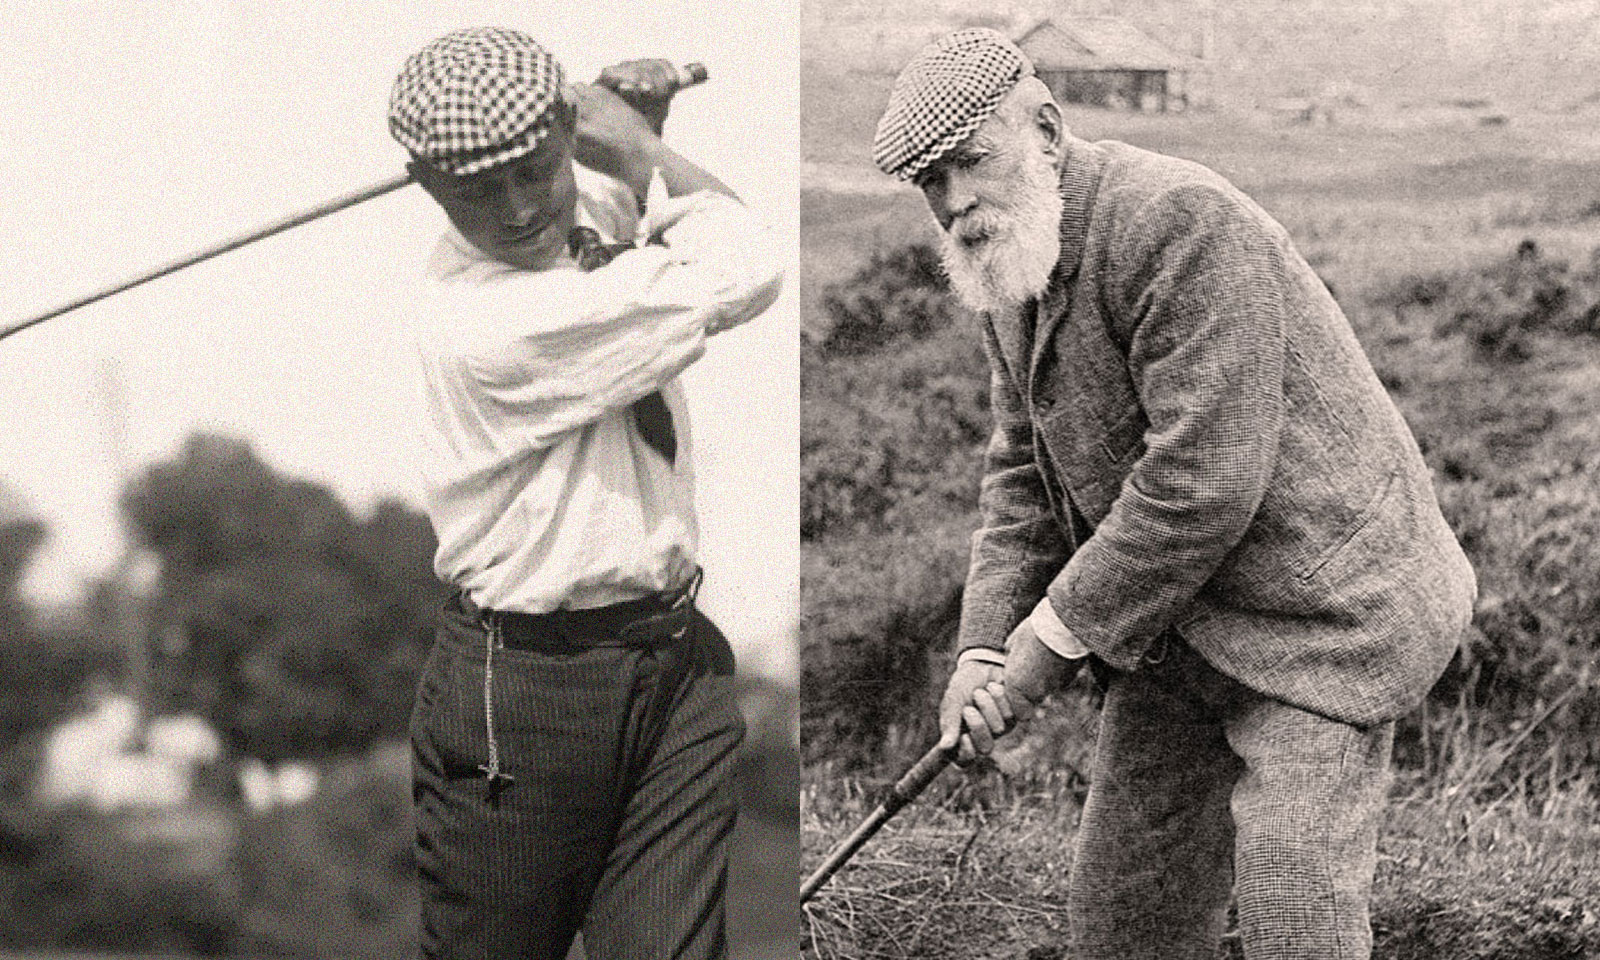 The 1896 Irony of Golf Pioneers Tom Morris and John Shippen